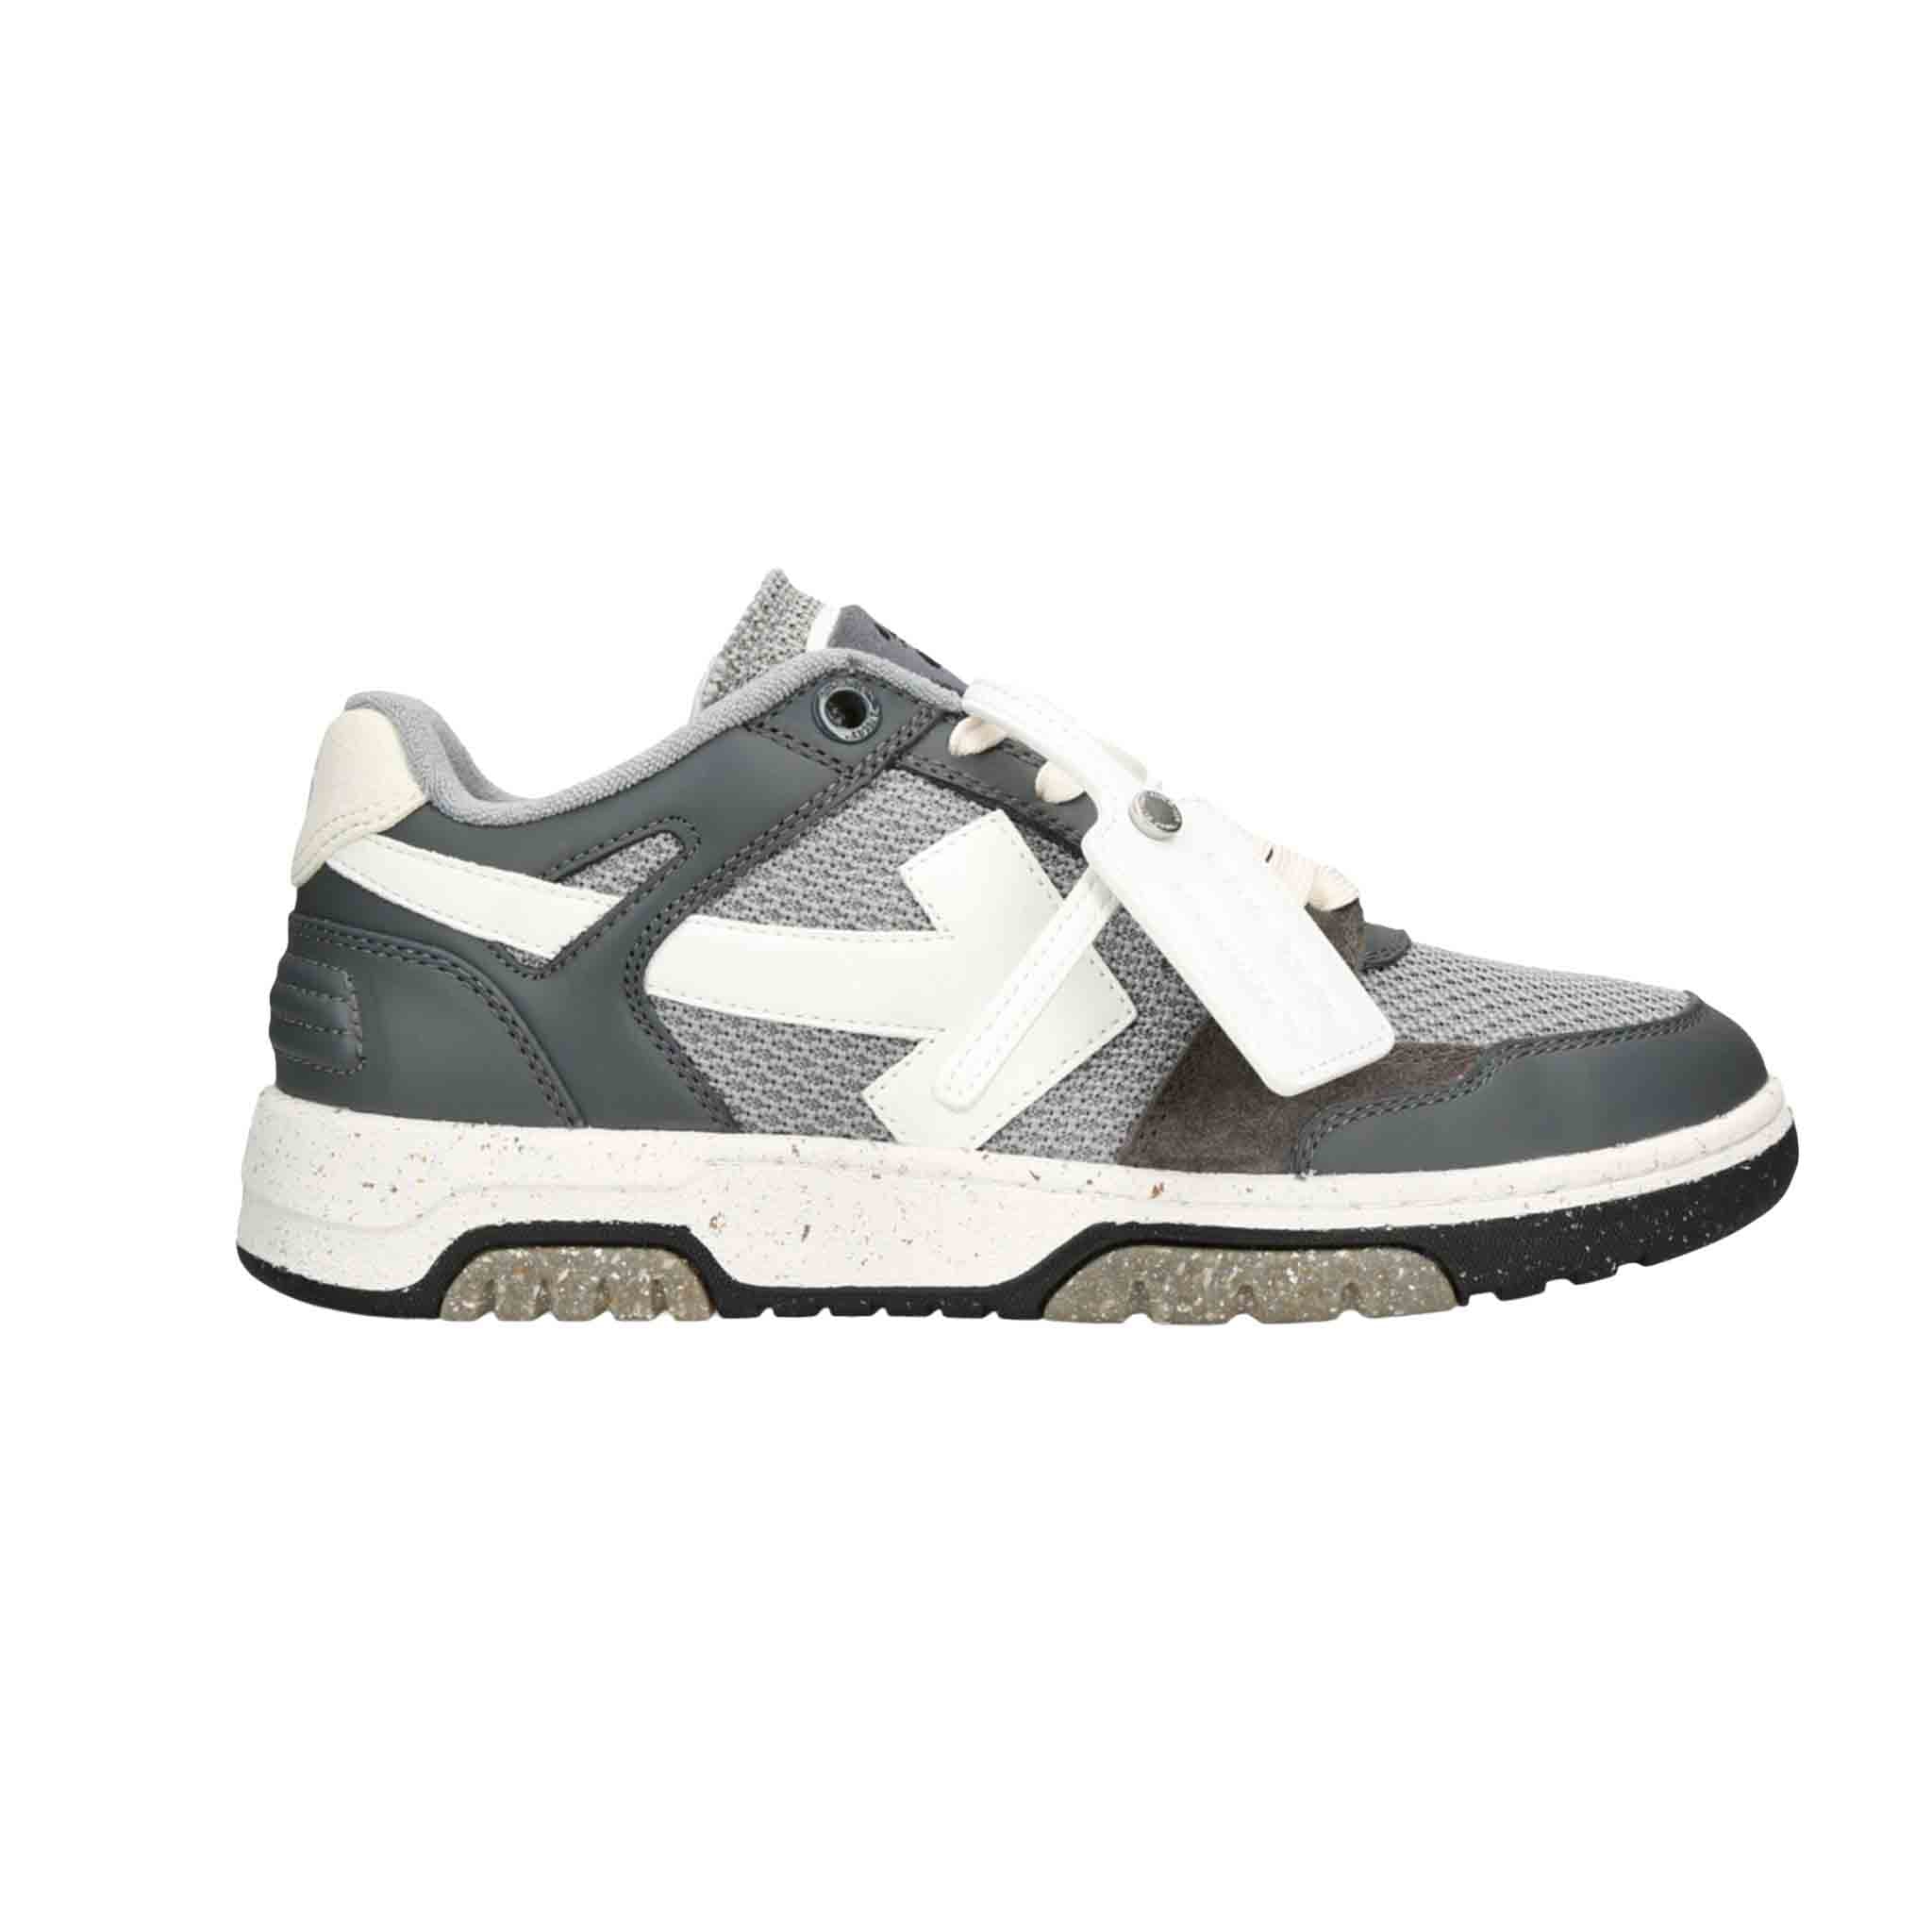 OFF-WHITE Slim Out Of Office Sneaker Leather and Mesh in Dark Grey/White